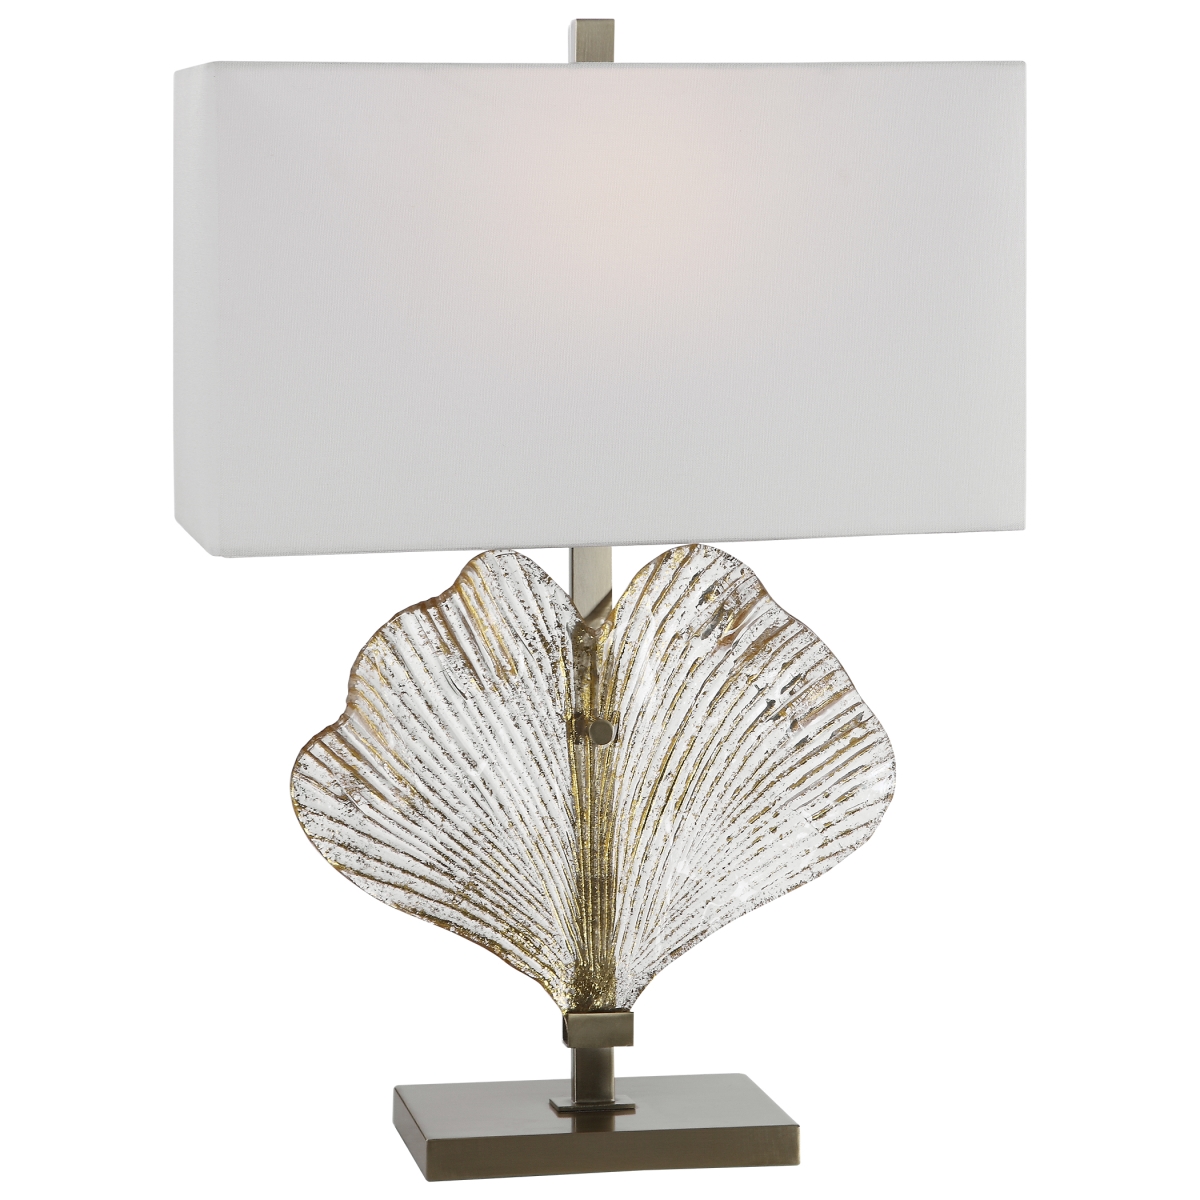 Picture of 212 Main 26363-1 Anara Glass Leaf Table Lamp